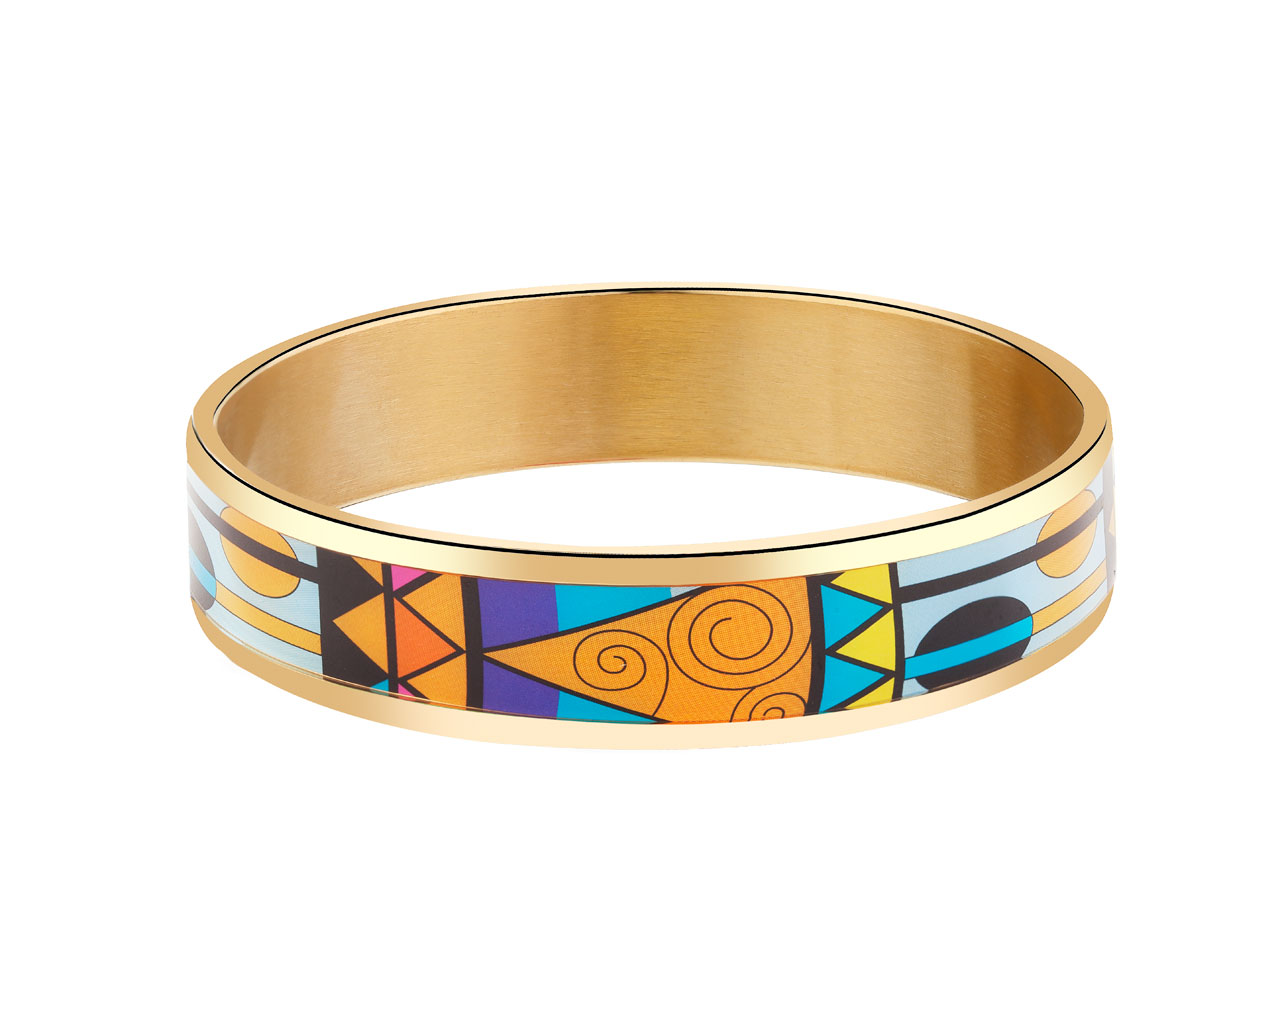 Champlevé Enamel Bangle Bracelet, Floral with blue background. Chinese –  Earthly Adornments